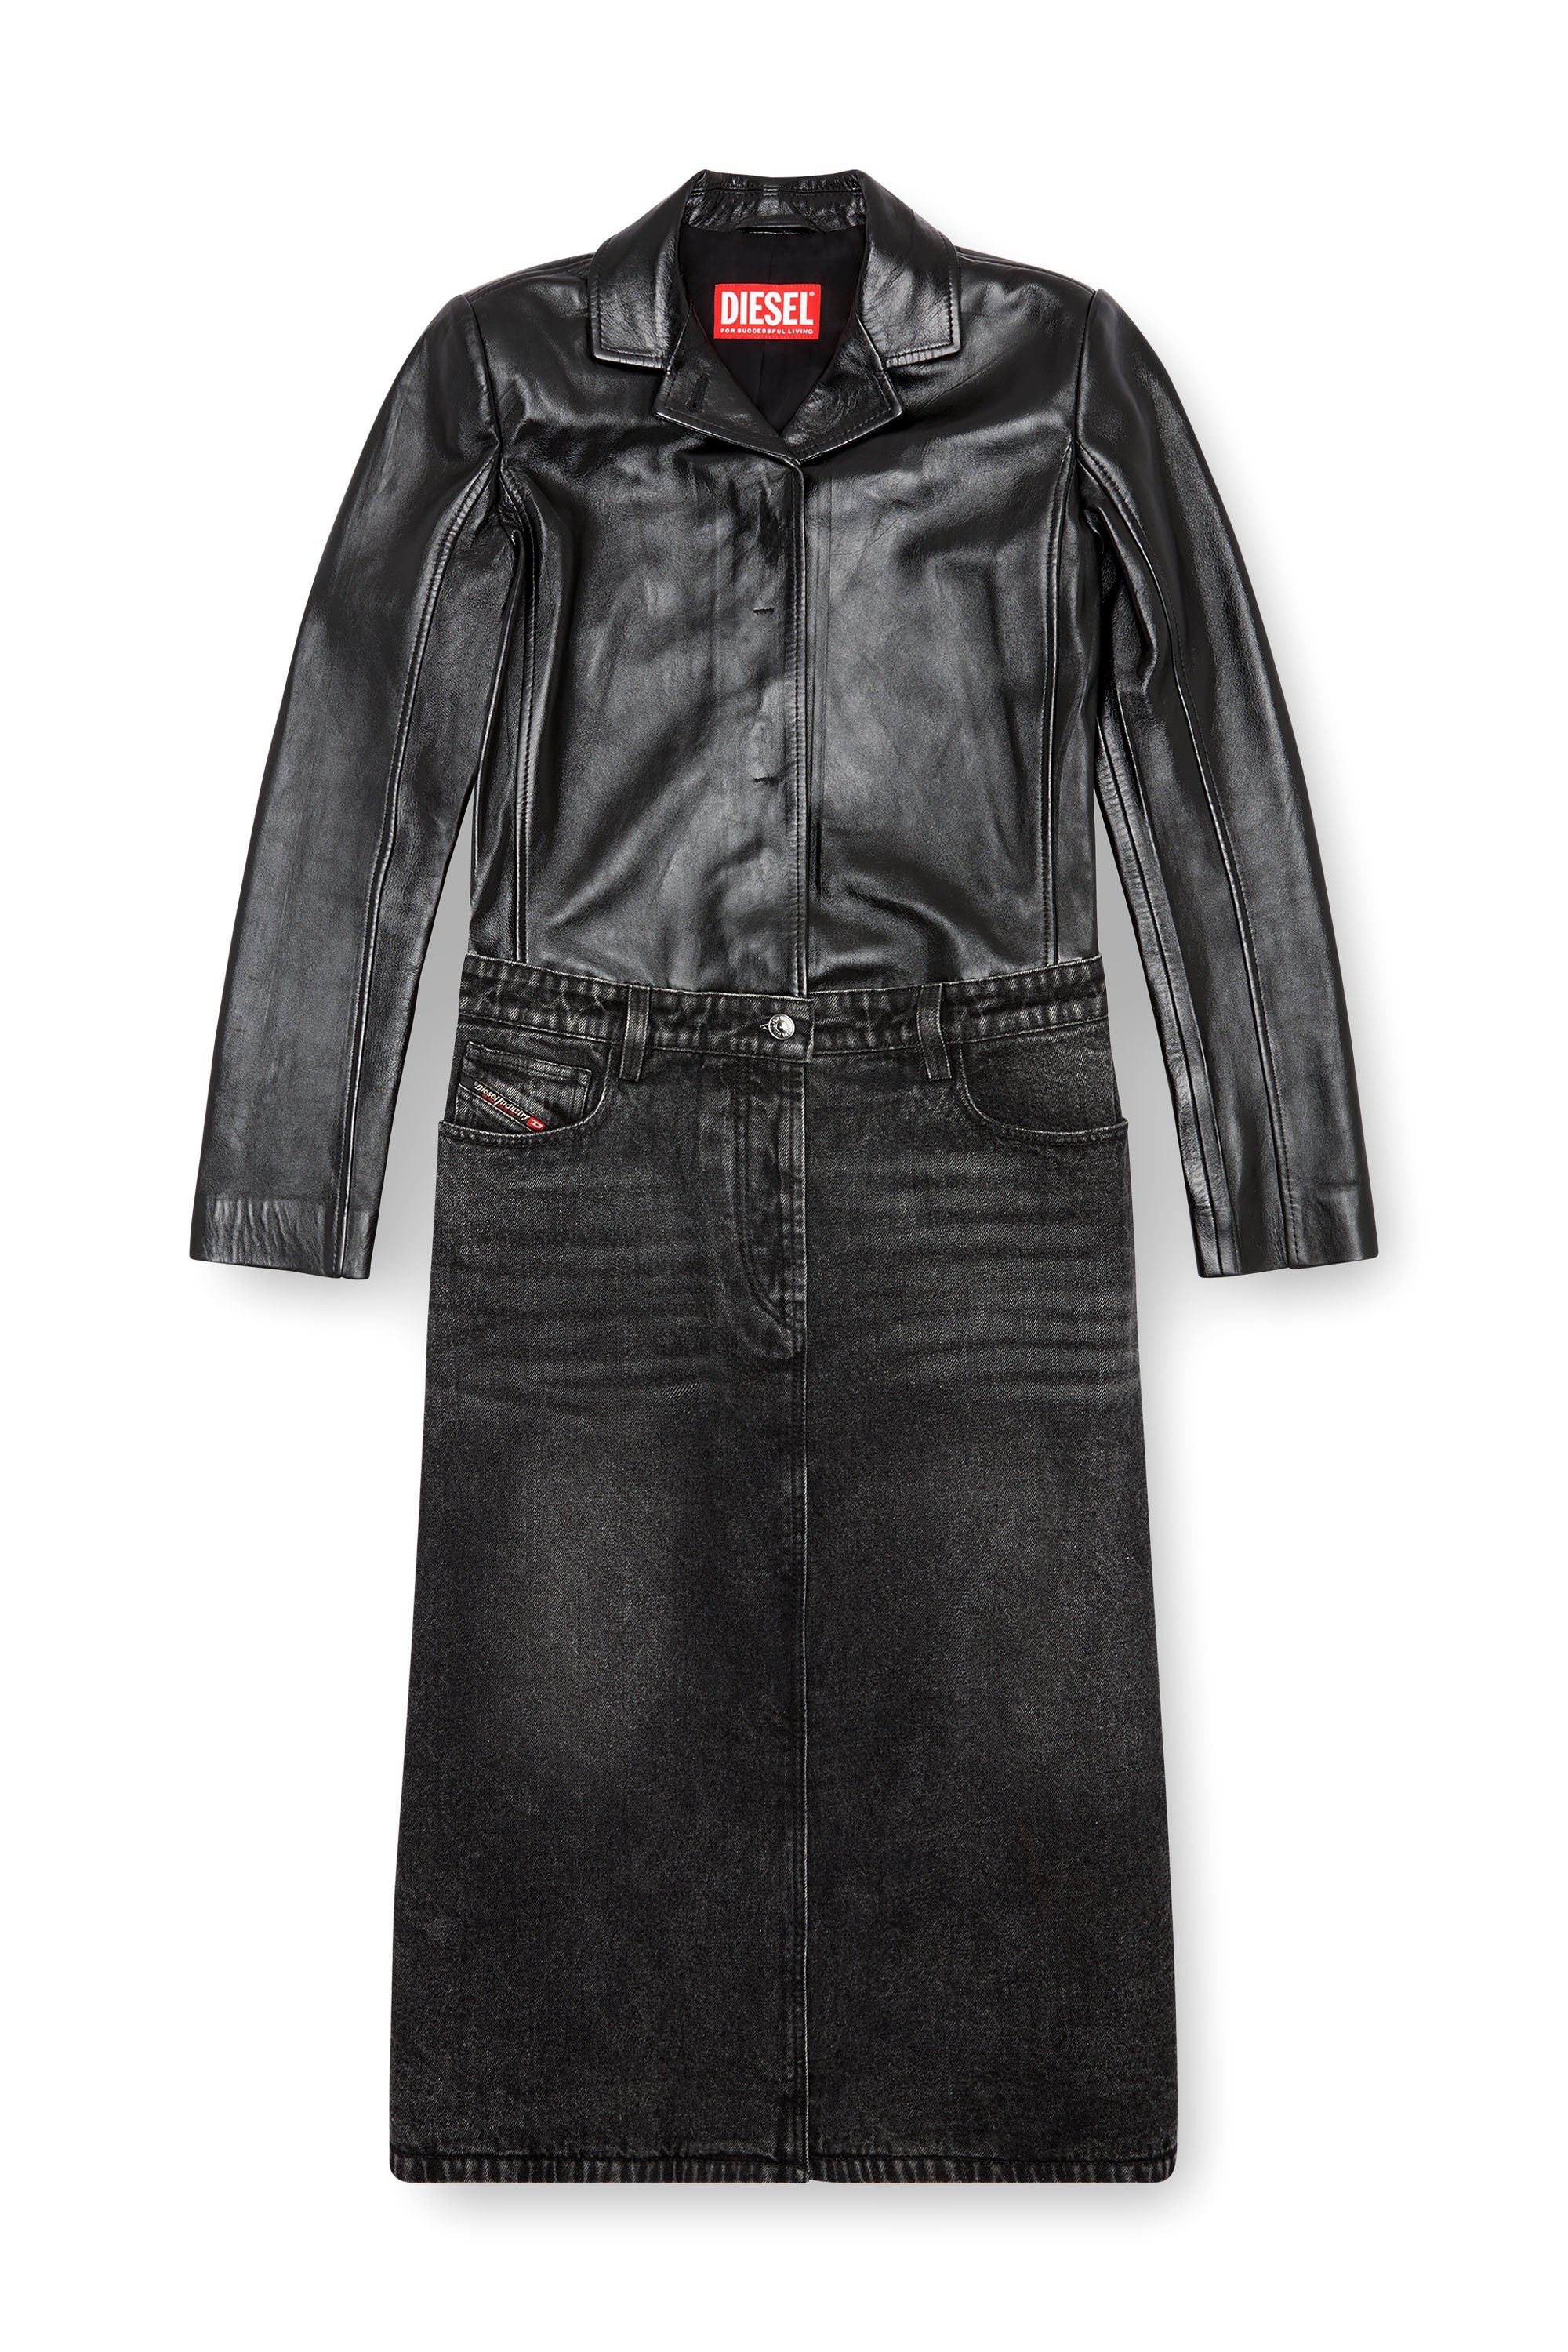 Diesel - L-ORY, Woman Hybrid coat in denim and leather in Black - Image 5